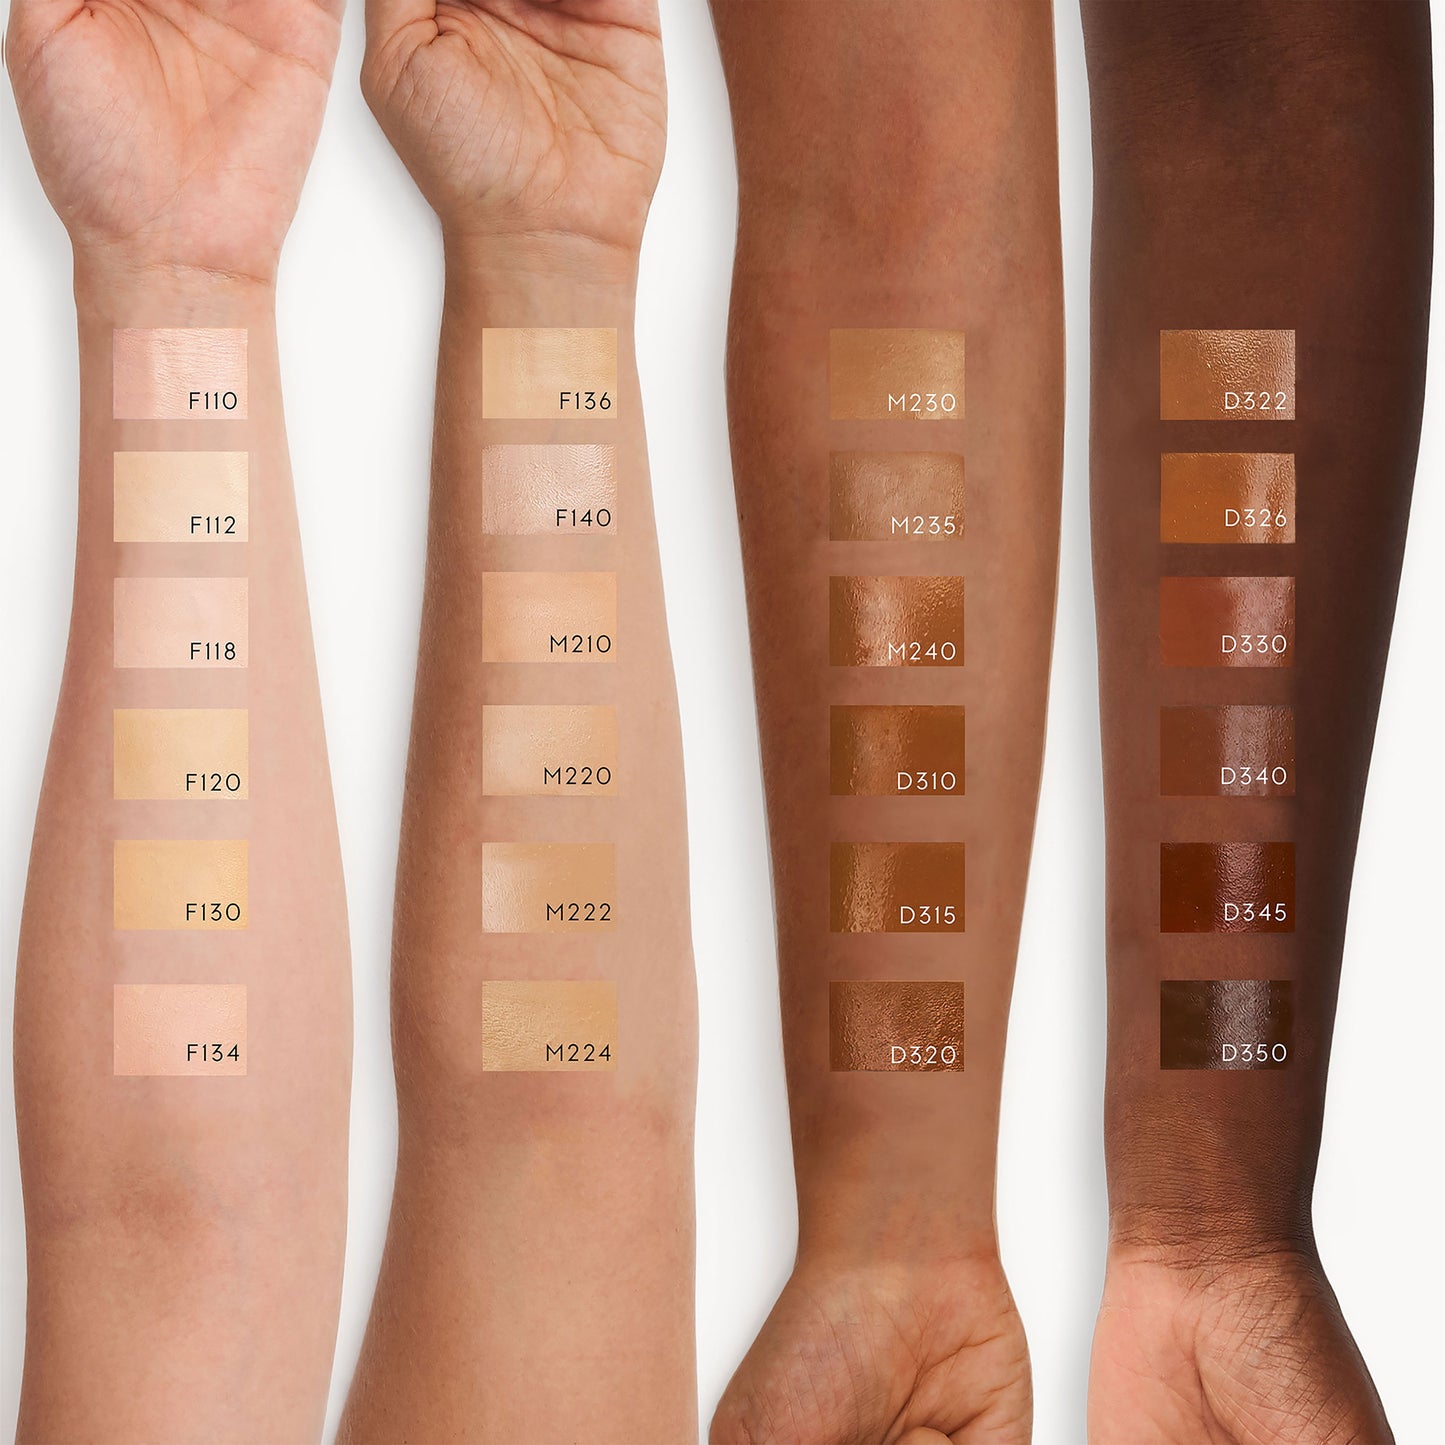 Four arms of different skin tones all with a swatch of cream foundation from darkest to lightest shade. D330 is the third-lightest shade on the deepest skin tone.  